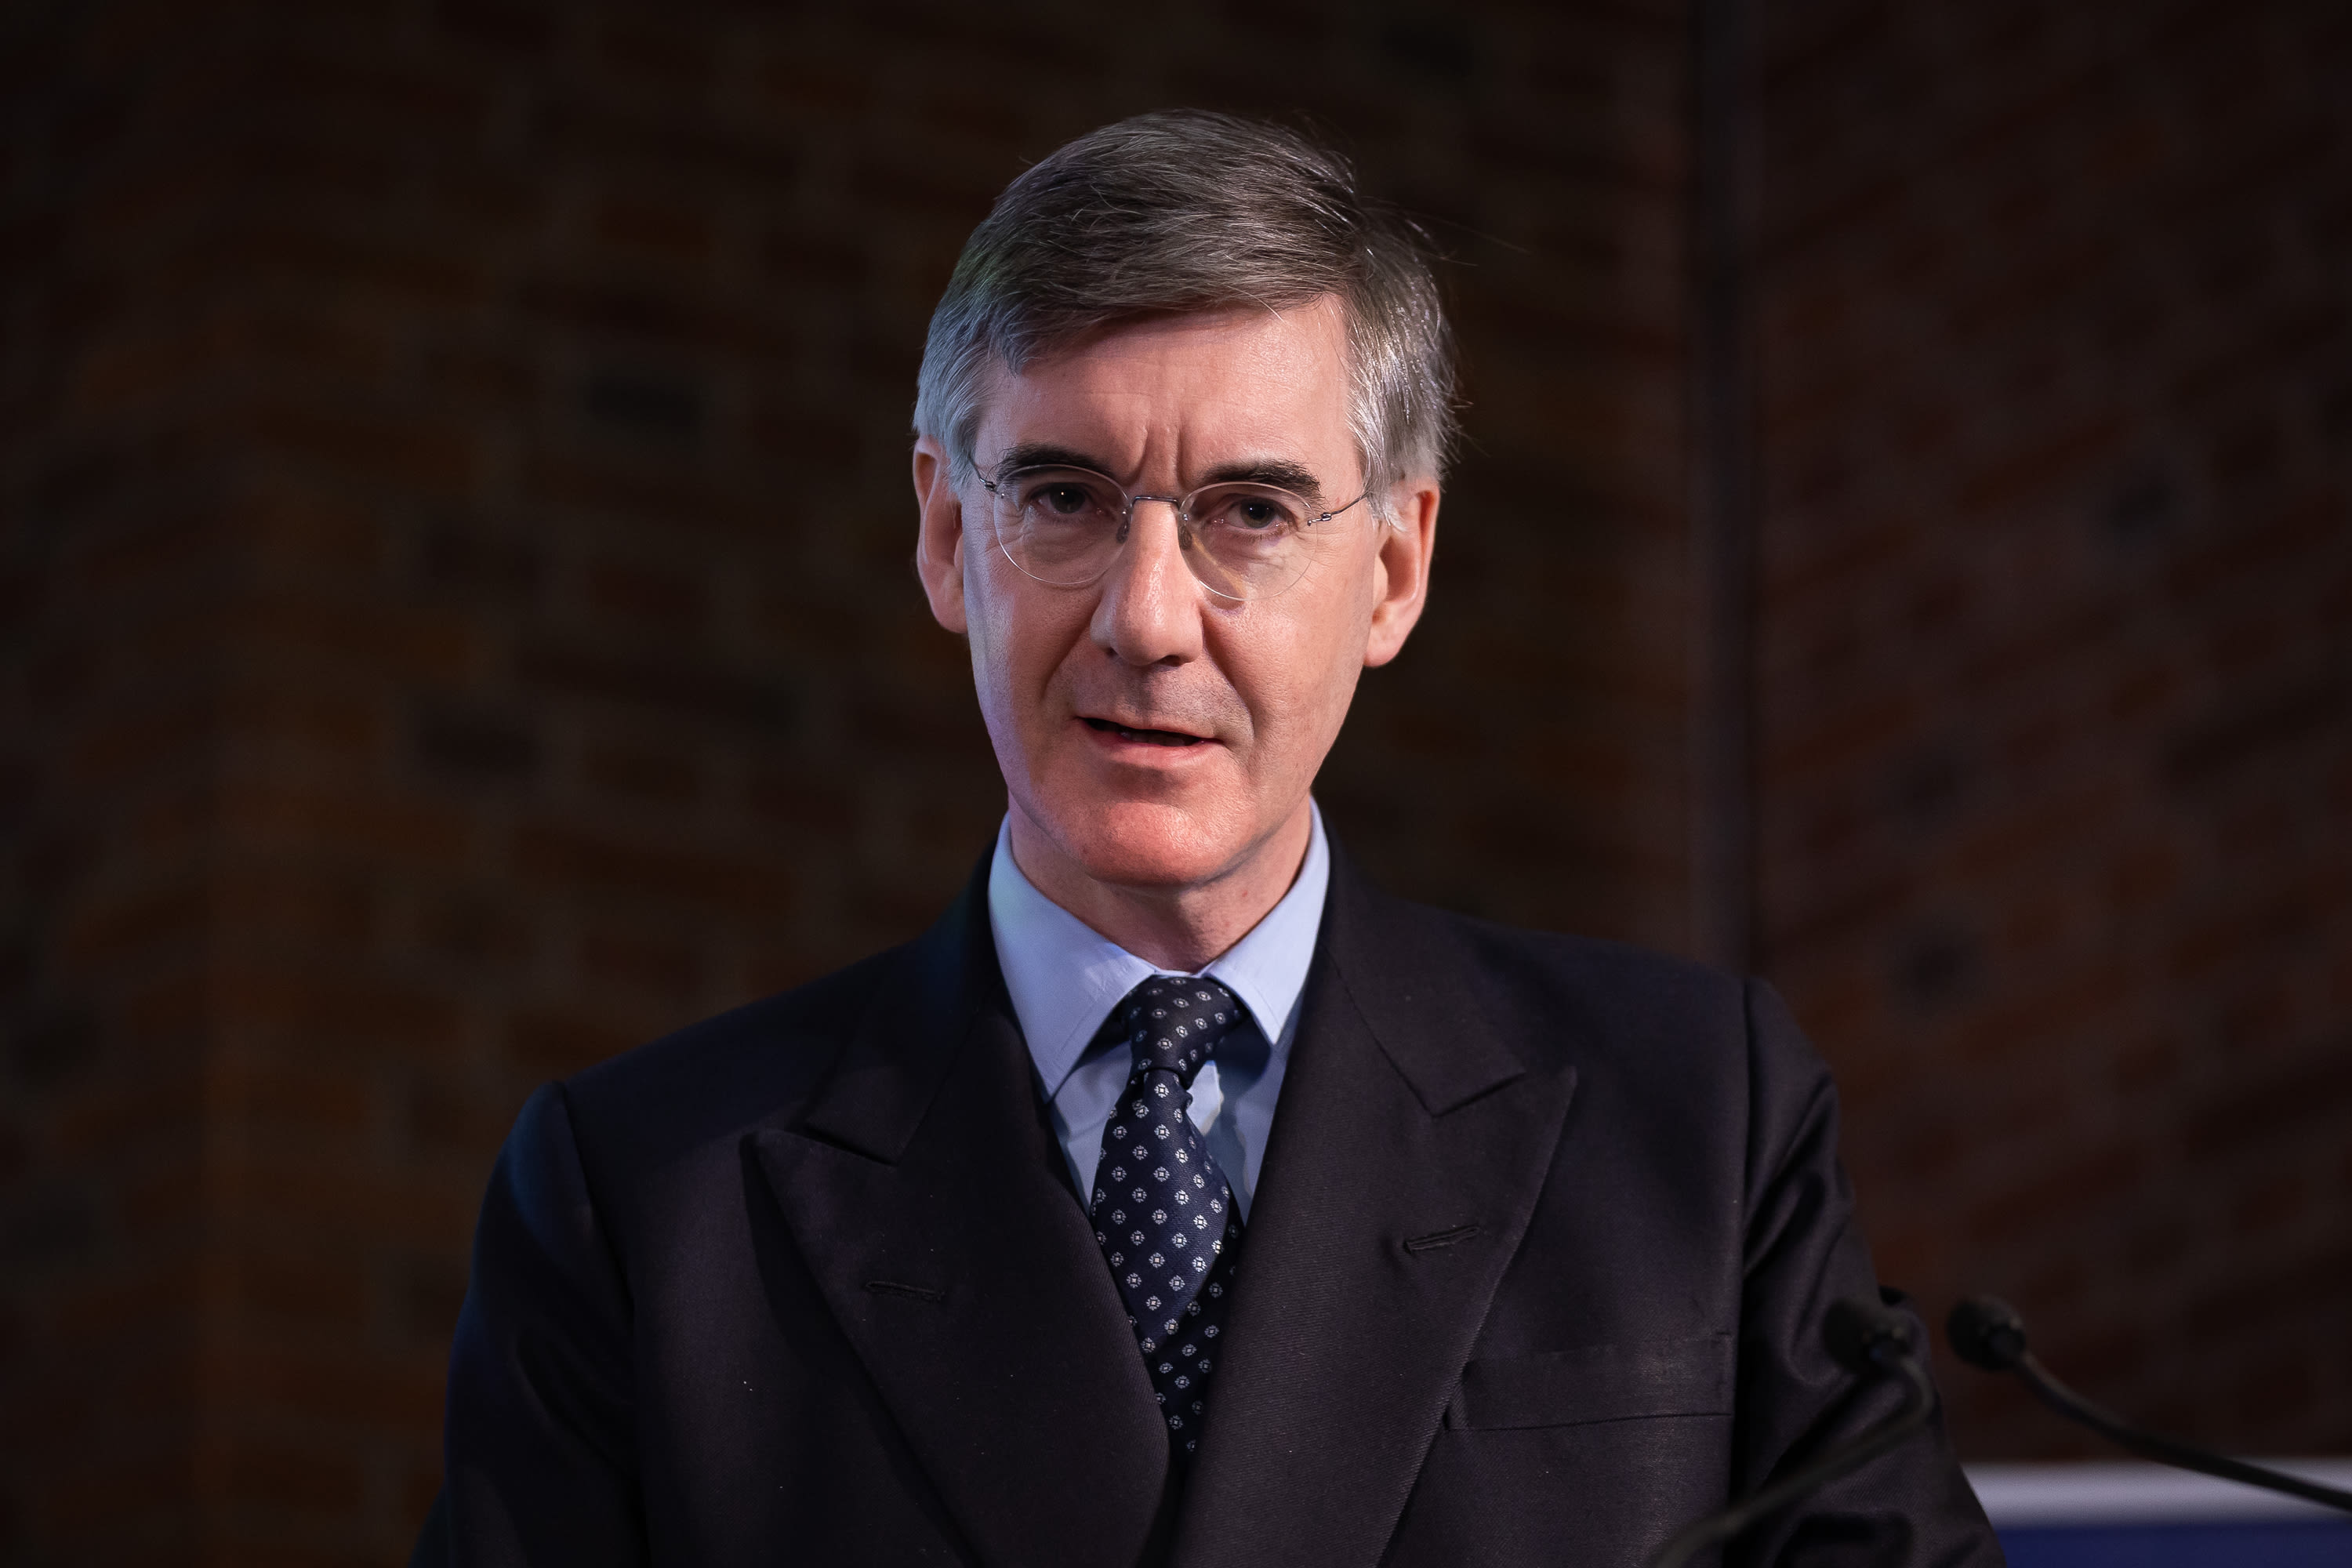 Jacob Rees-Mogg claims UK government 'downplayed' risks of AstraZeneca COVID vaccine